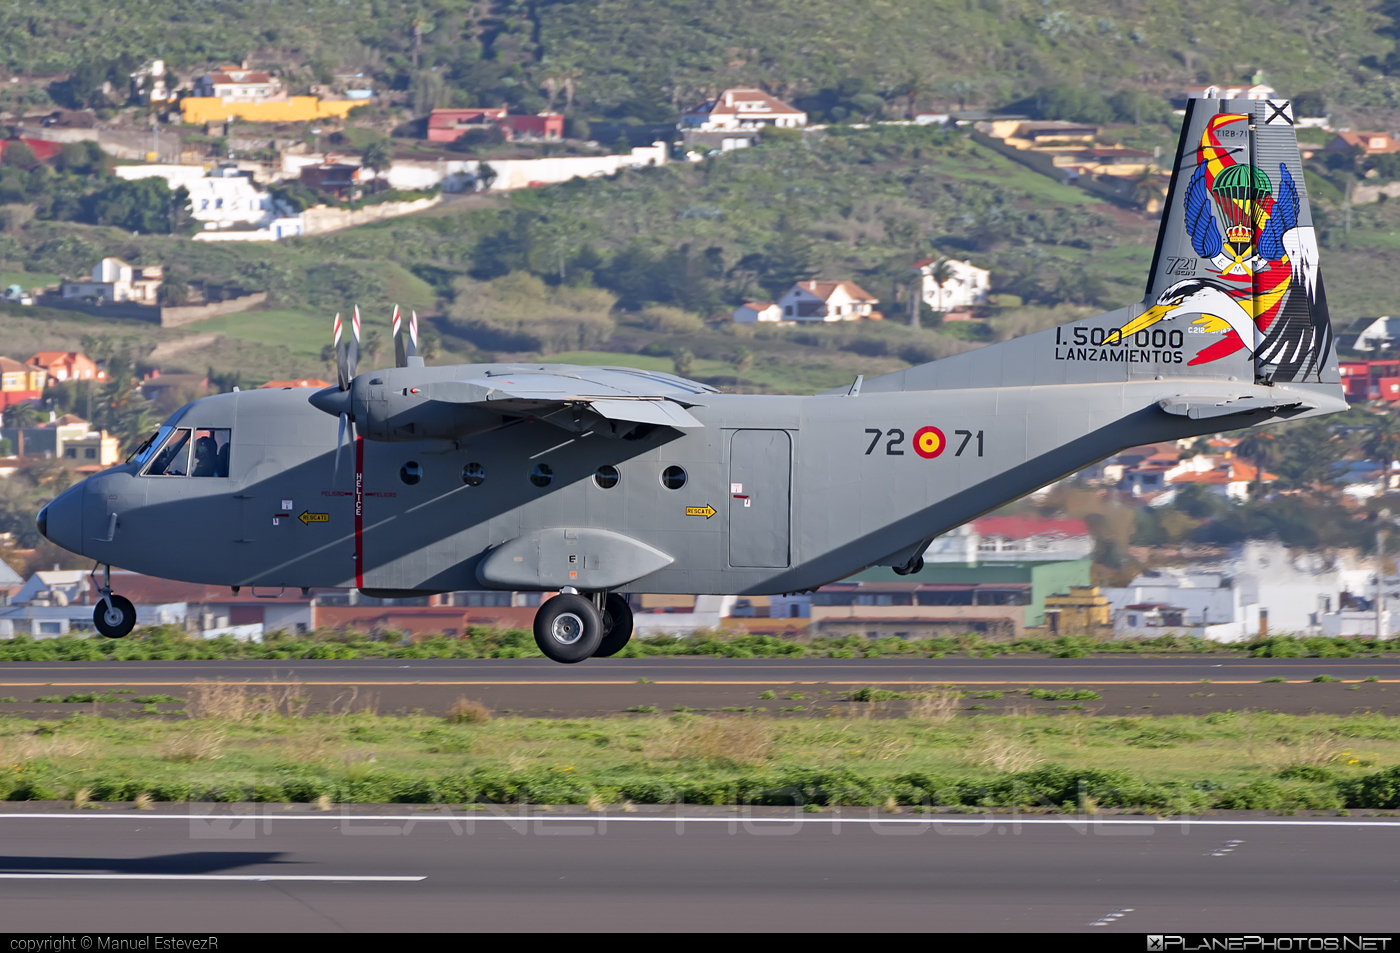 CASA C-212-100 Aviocar - T.12B-71 operated by Ejército del Aire (Spanish Air Force) #casa #ejercitoDelAire #spanishAirForce